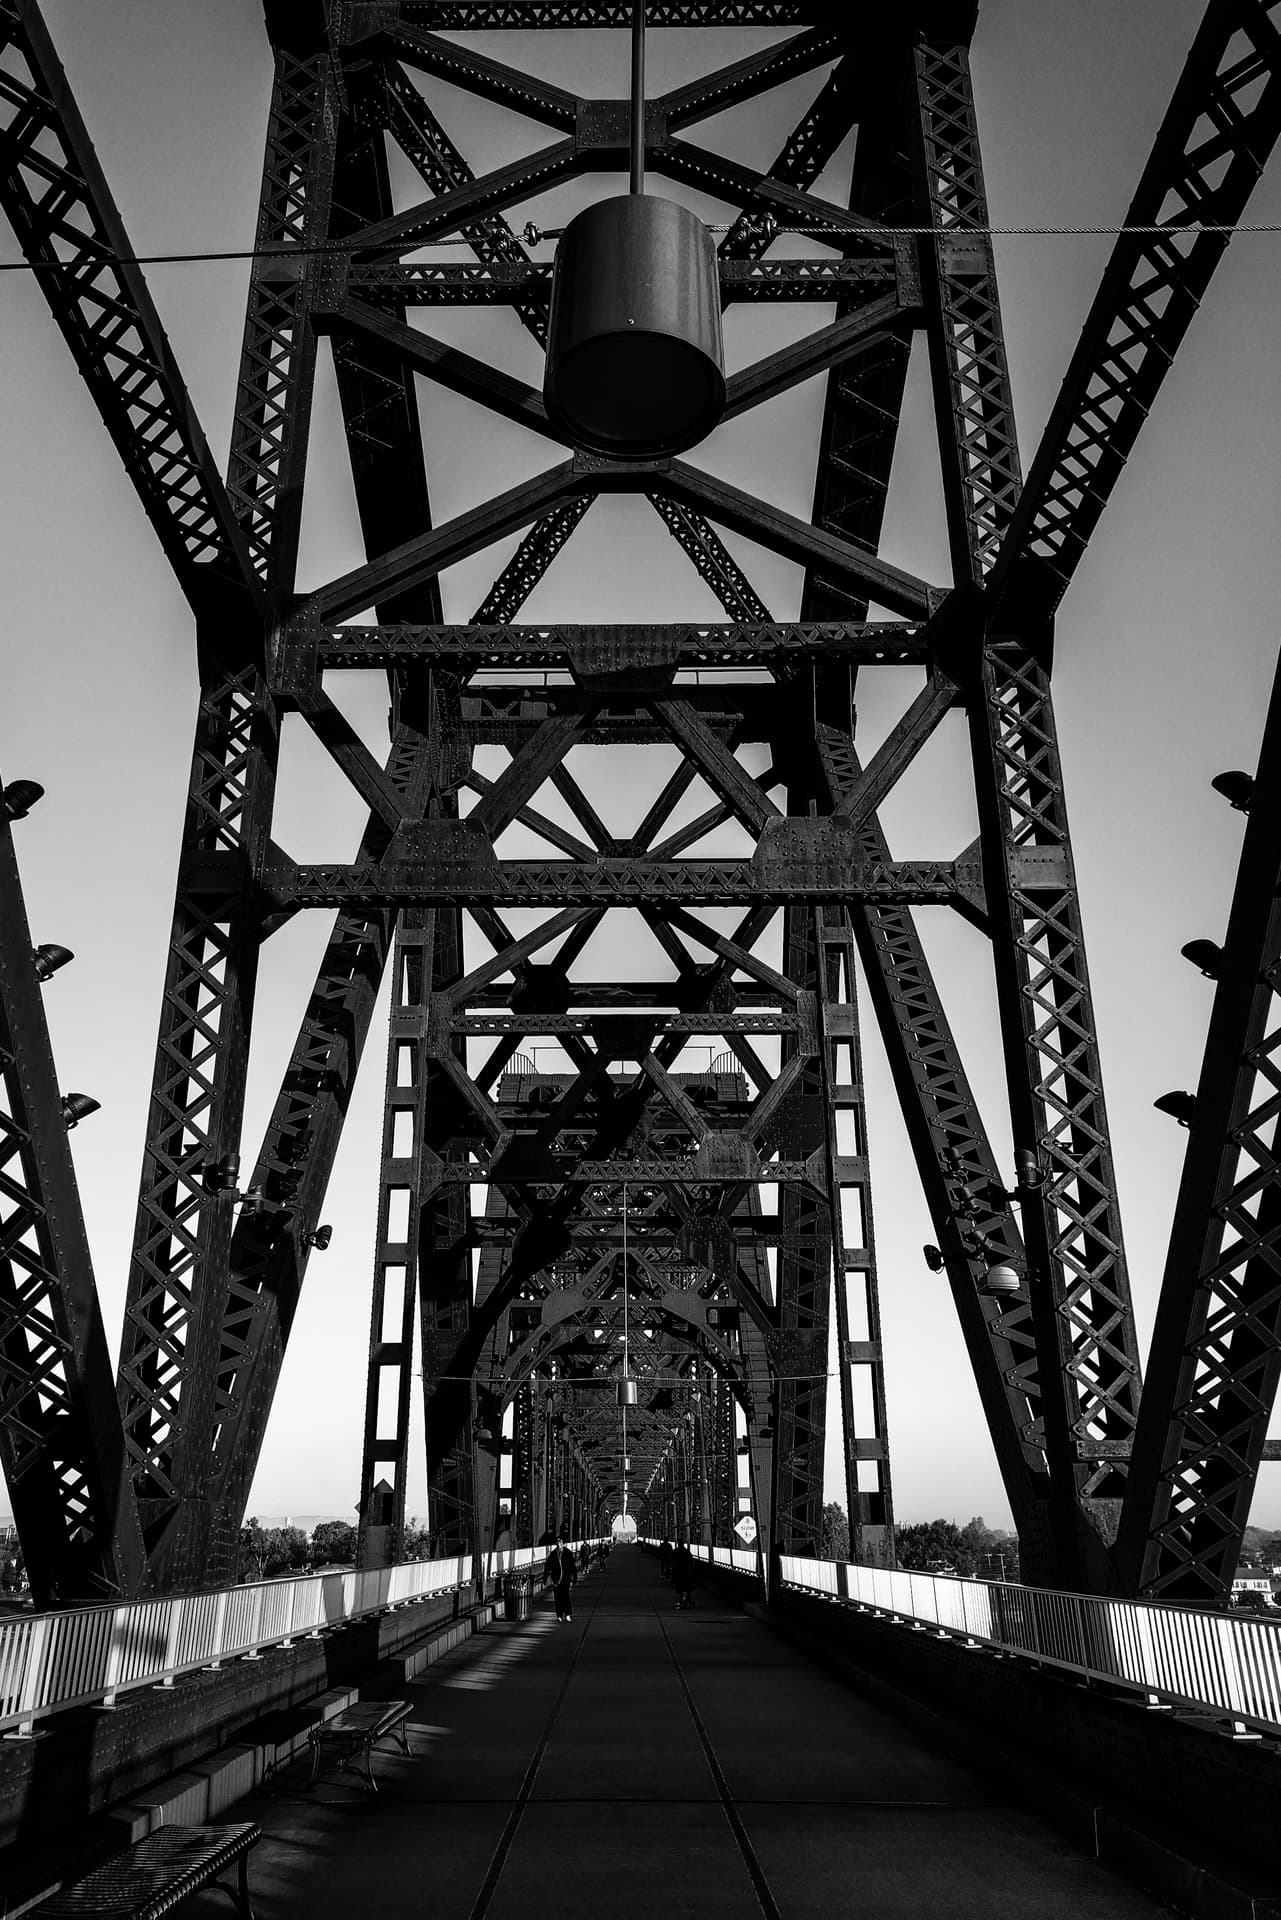 Looking north towards Indiana along a steel footbridge crossing the Ohio River. A large number of pedestrians are walking along the footbridge towards the photographer.